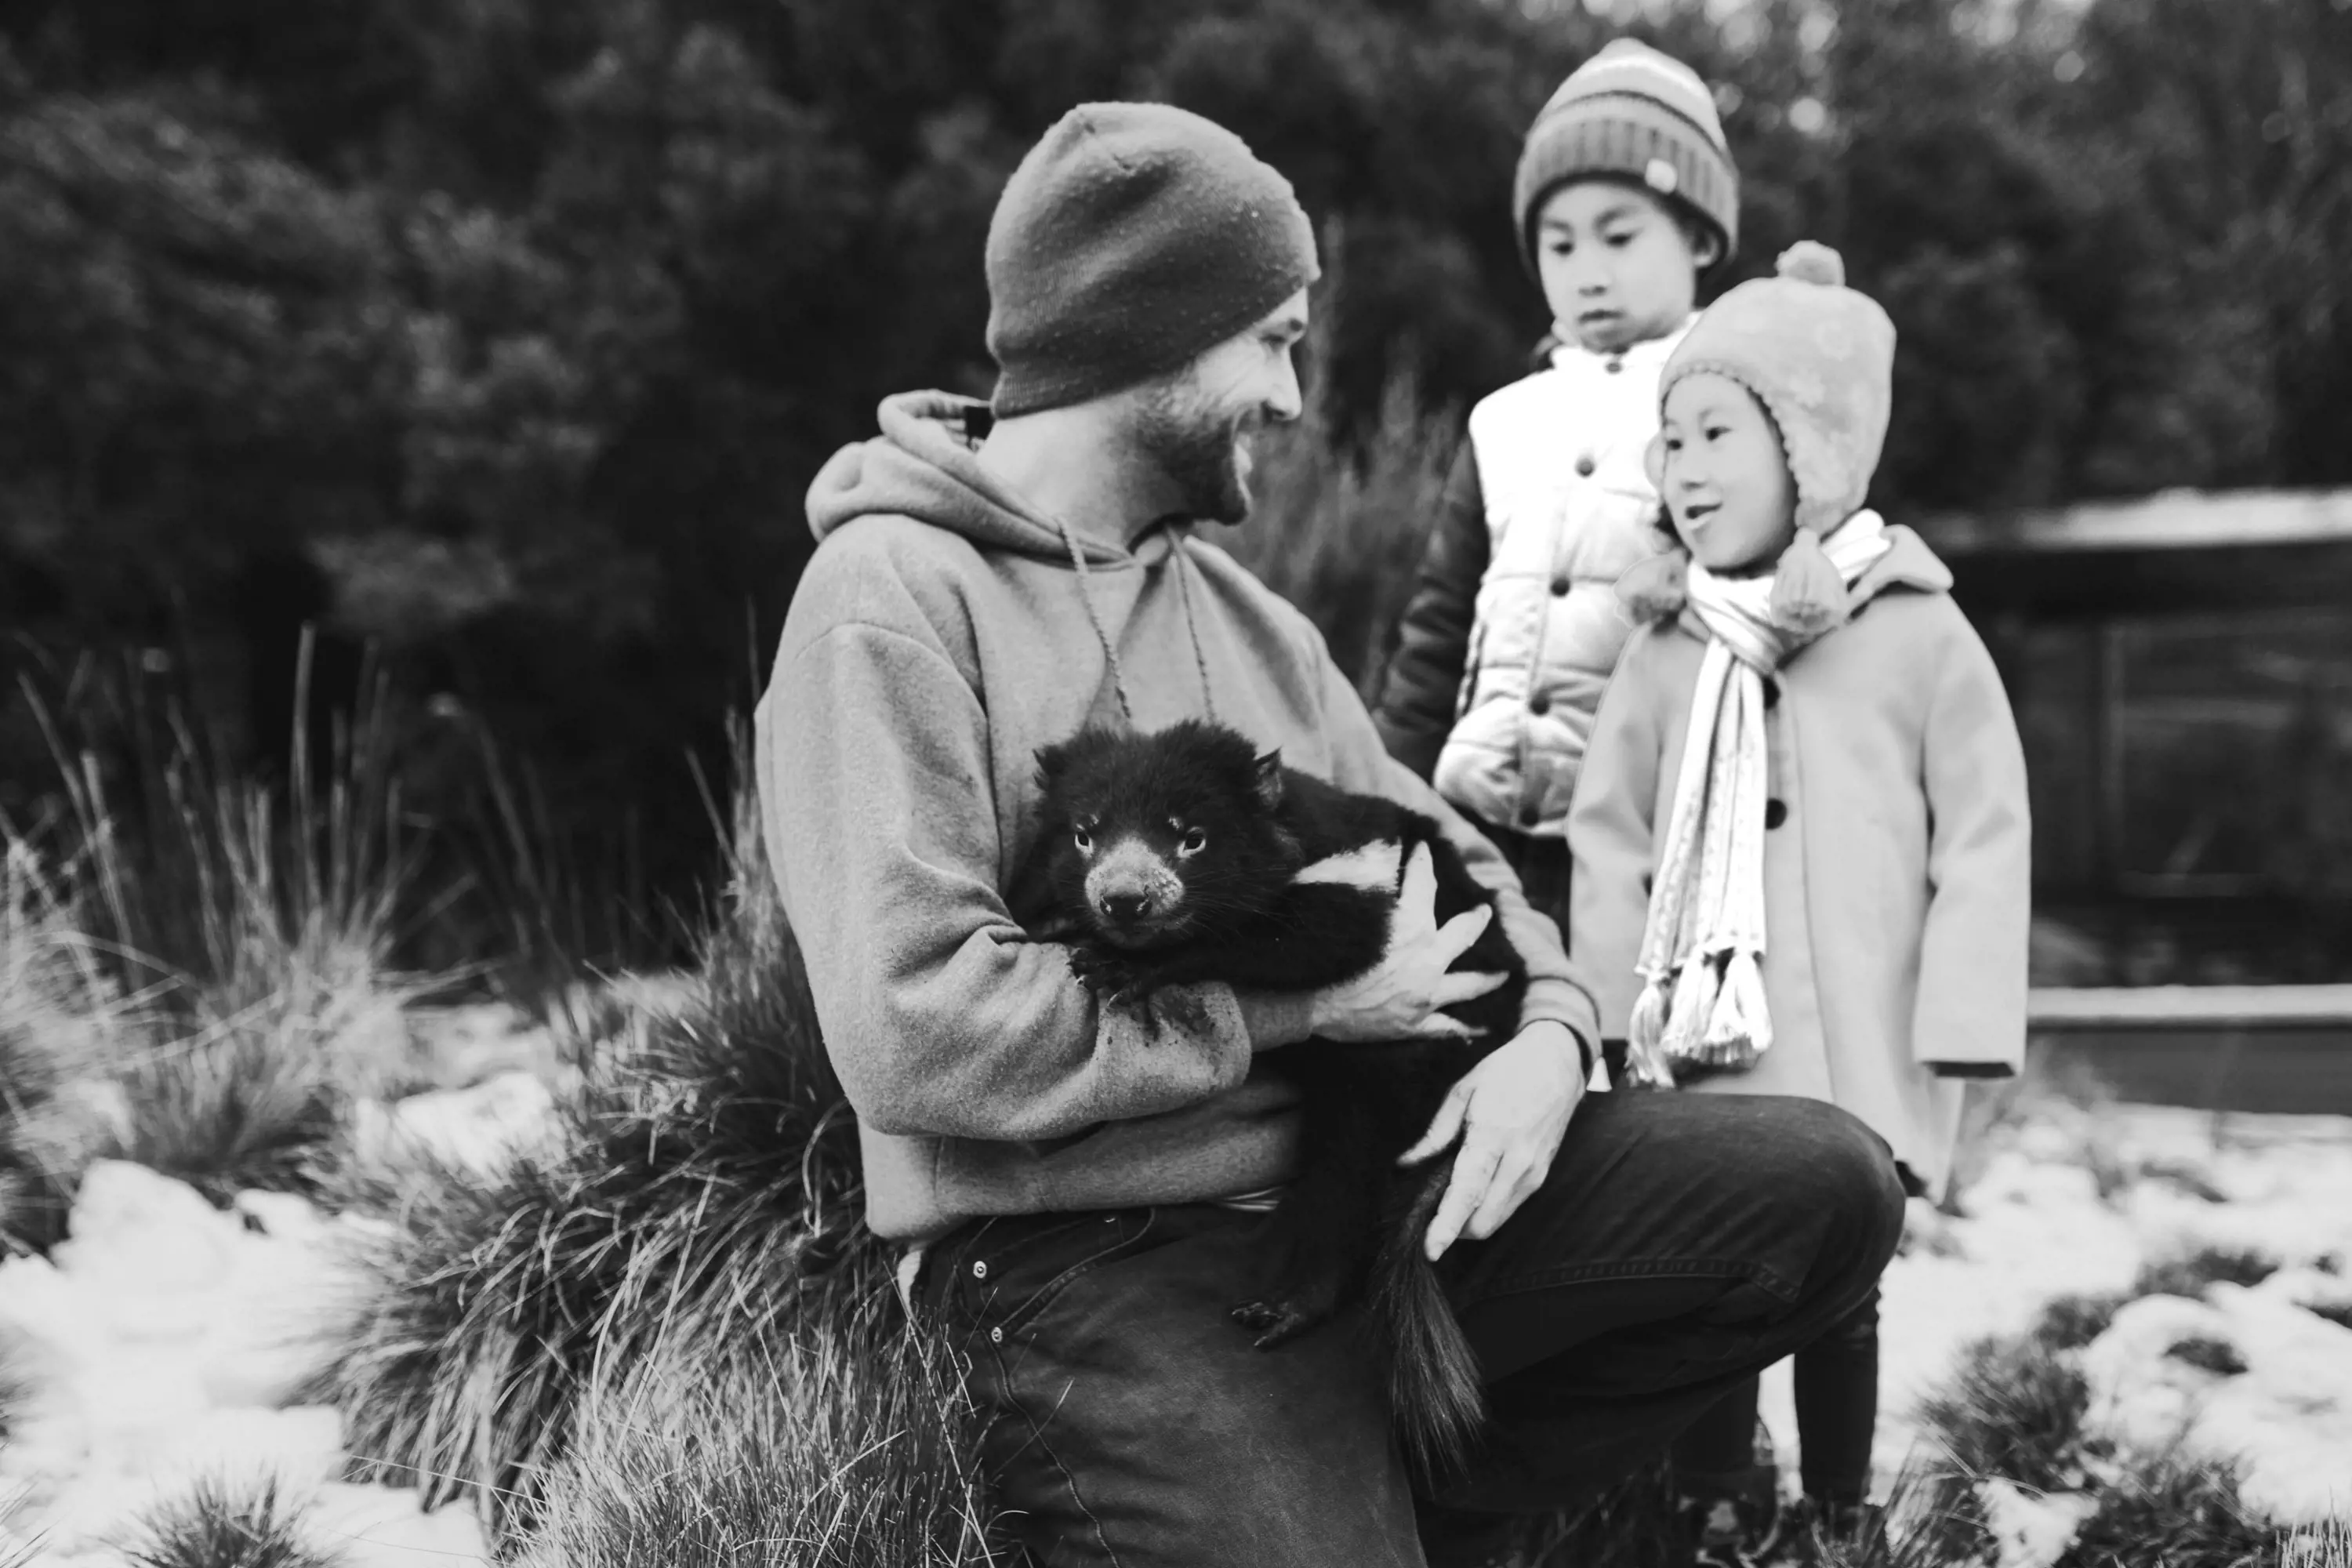 A park guide holds a small, black and white Tasmanian devil while two small children smile and look on.